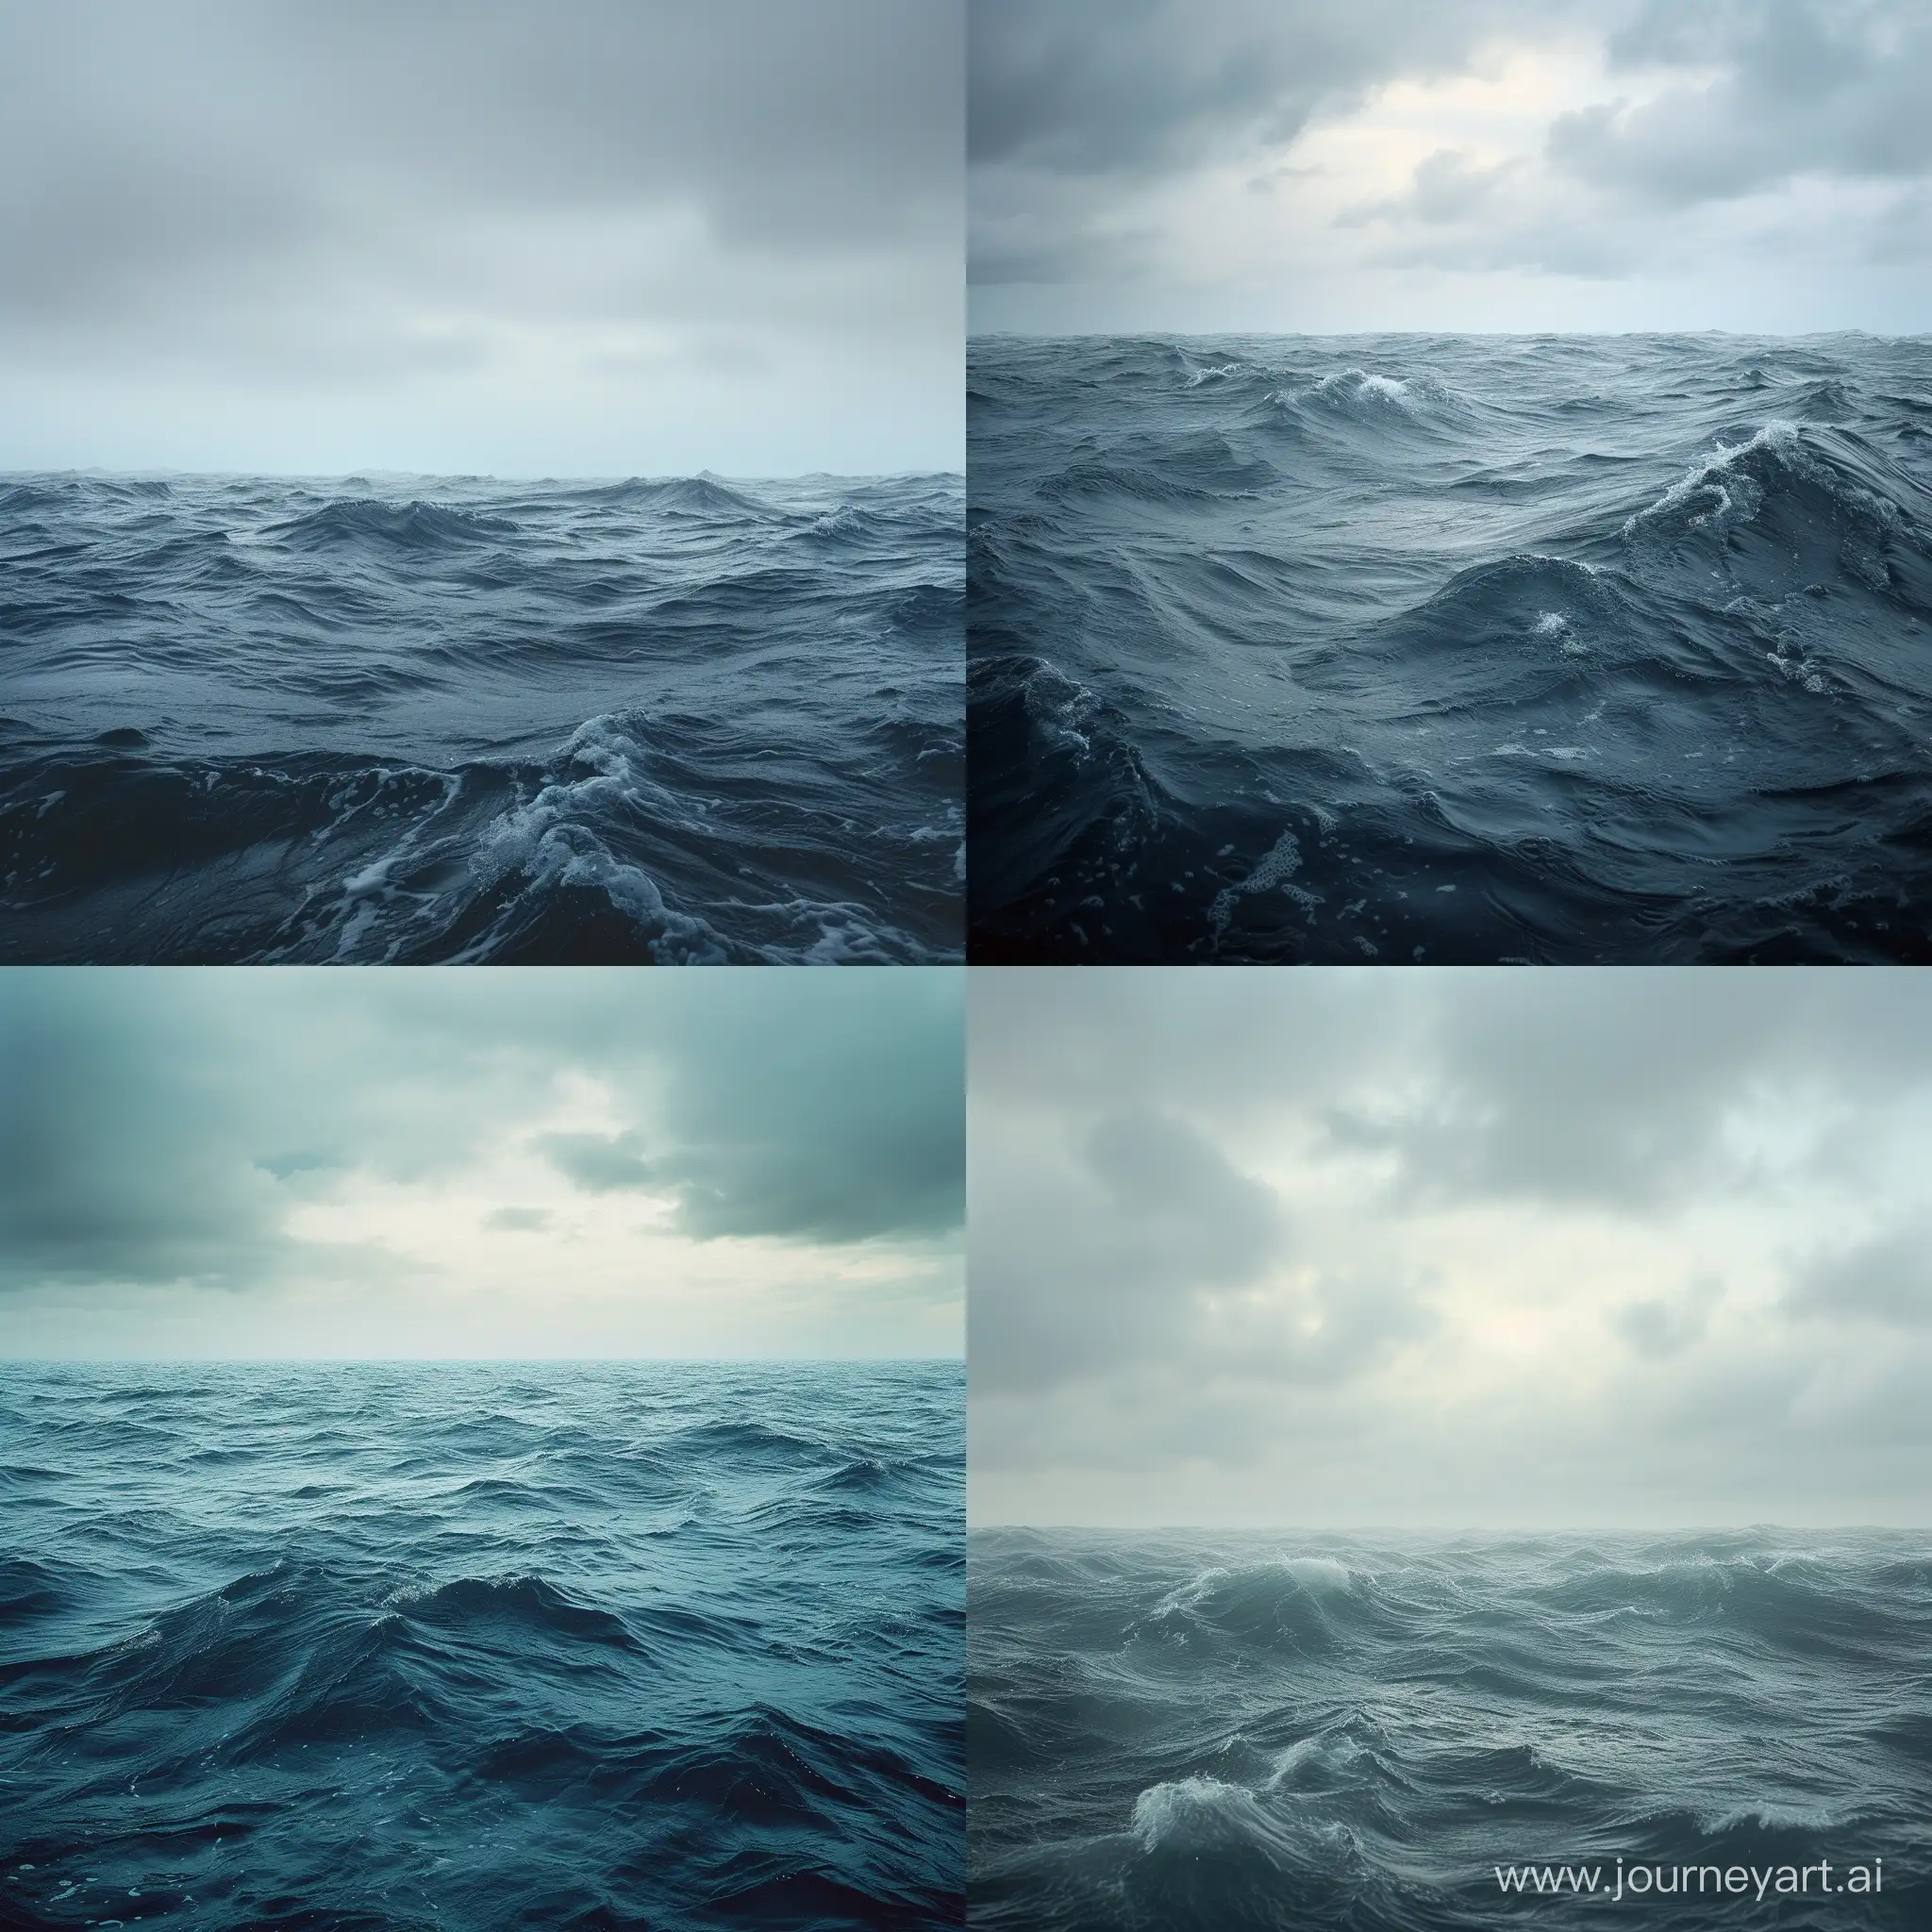 Describe the unsettling transformation of the once tranquil ocean.
